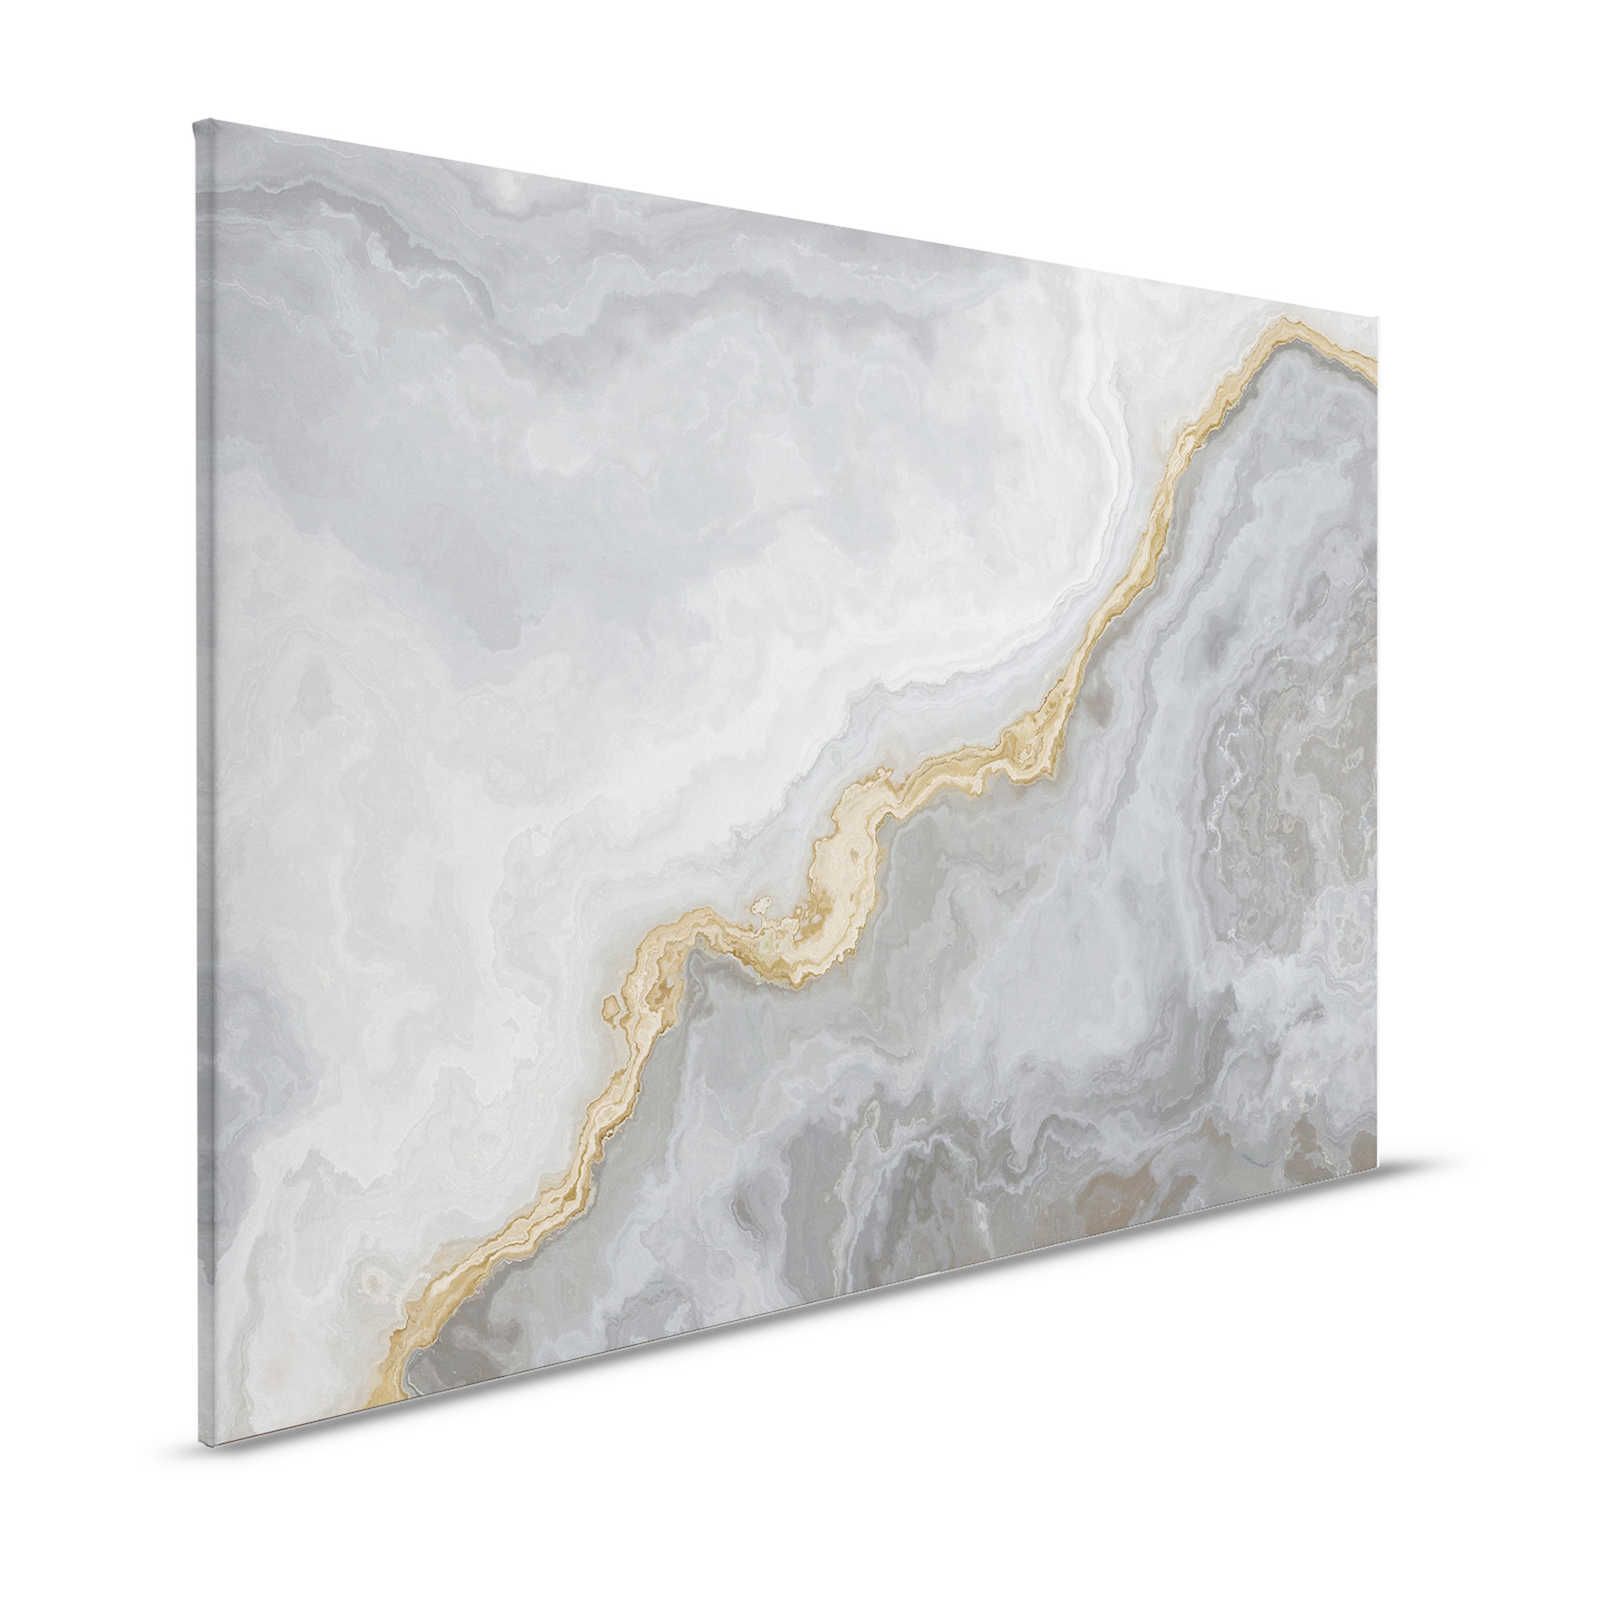 Canvas painting stone look quartz with marbling - 1,20 m x 0,80 m
